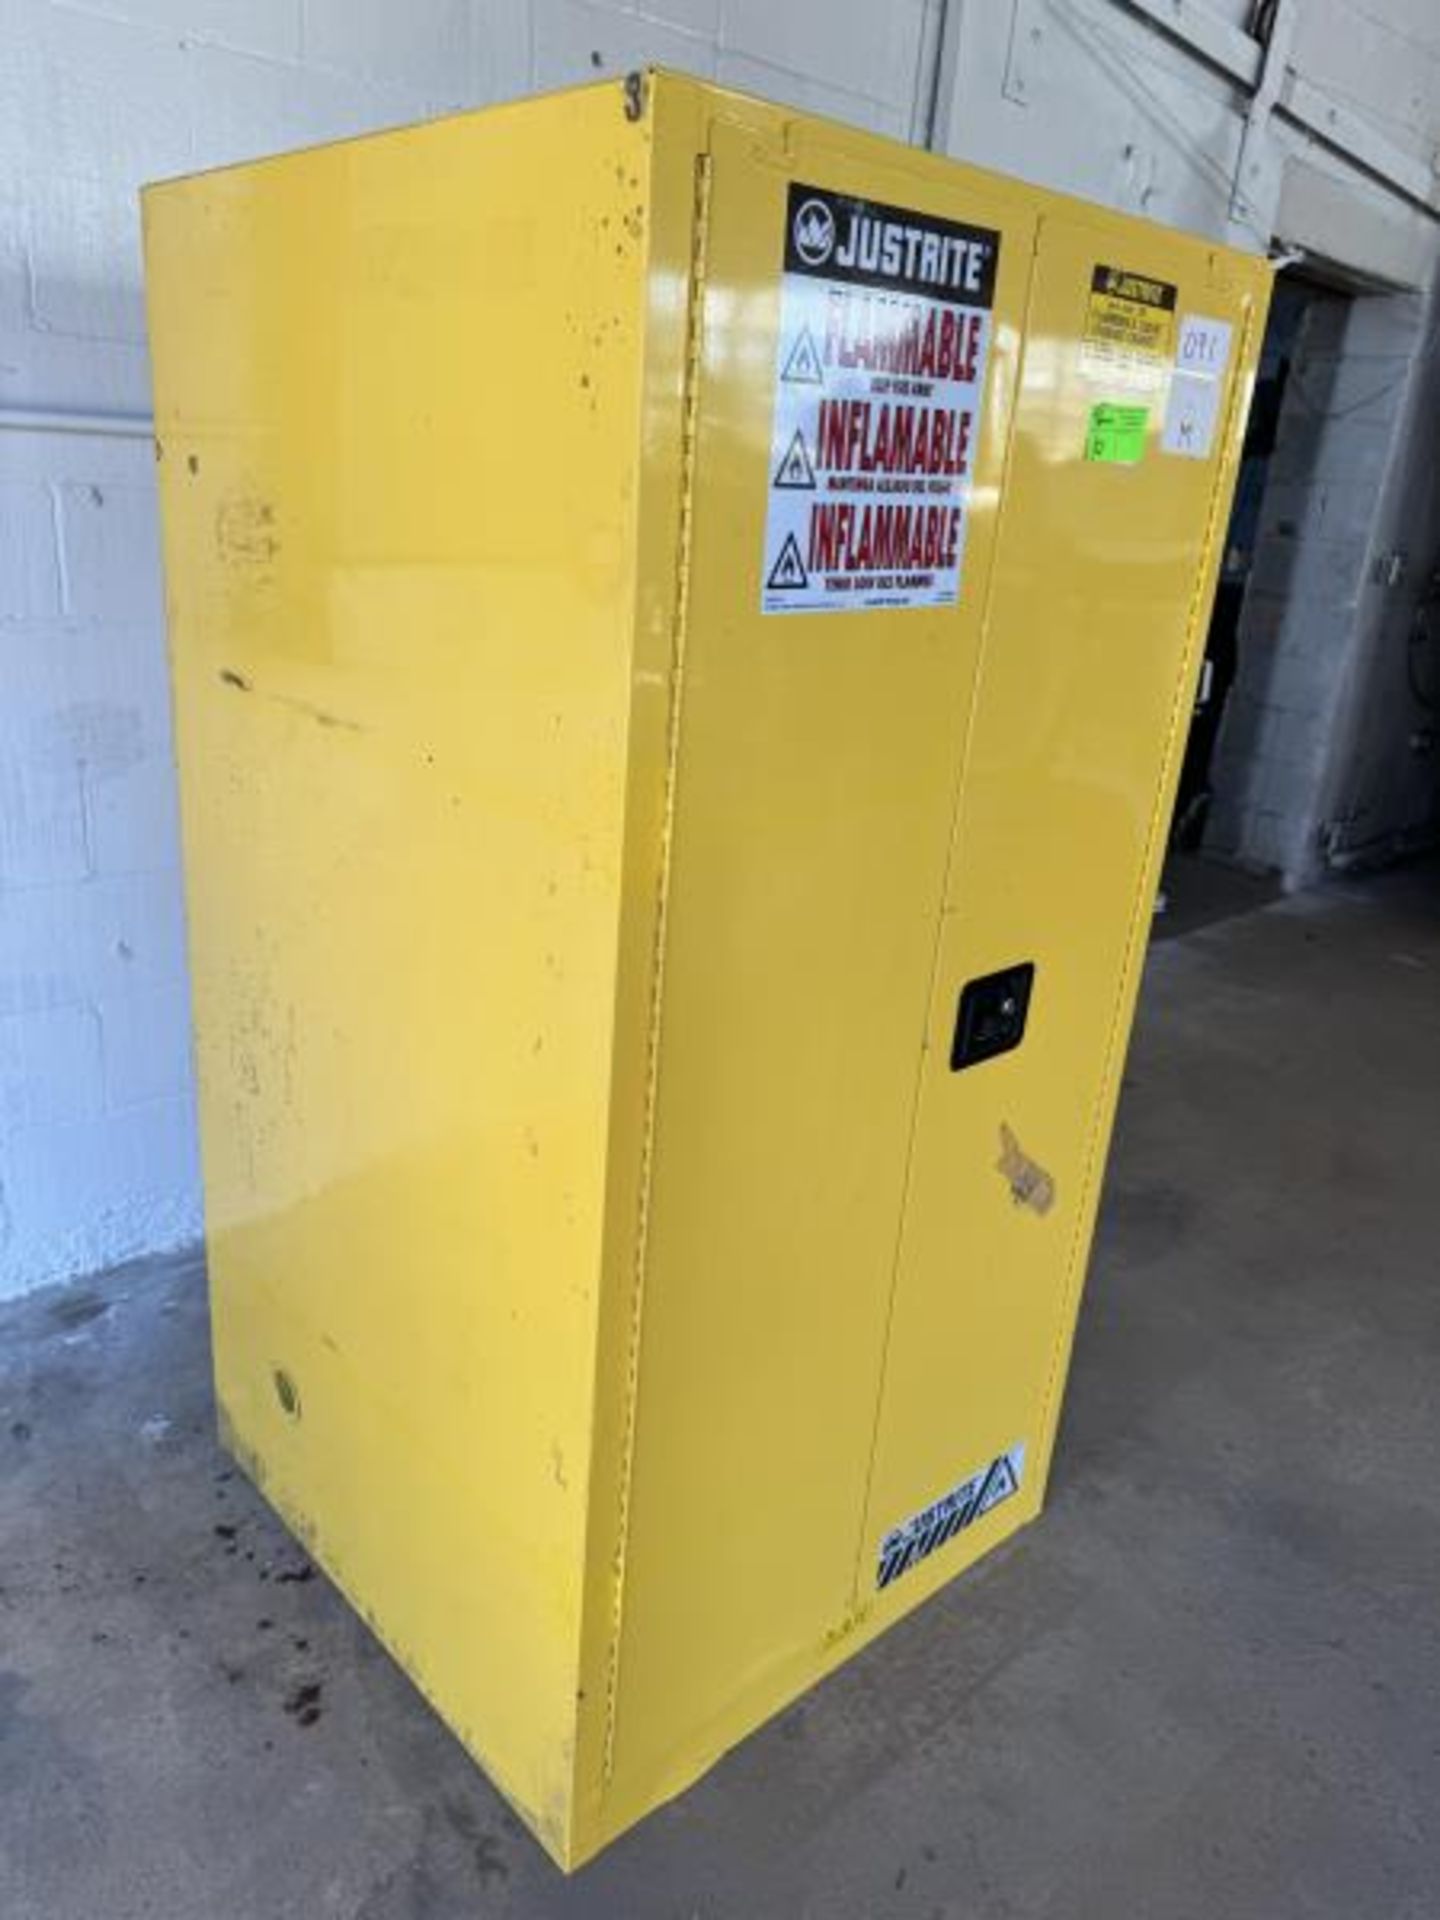 Justrite Flammable Liquid Storage Cabinet 34" Wide x 34" Deep x 66" Tall - Image 2 of 7